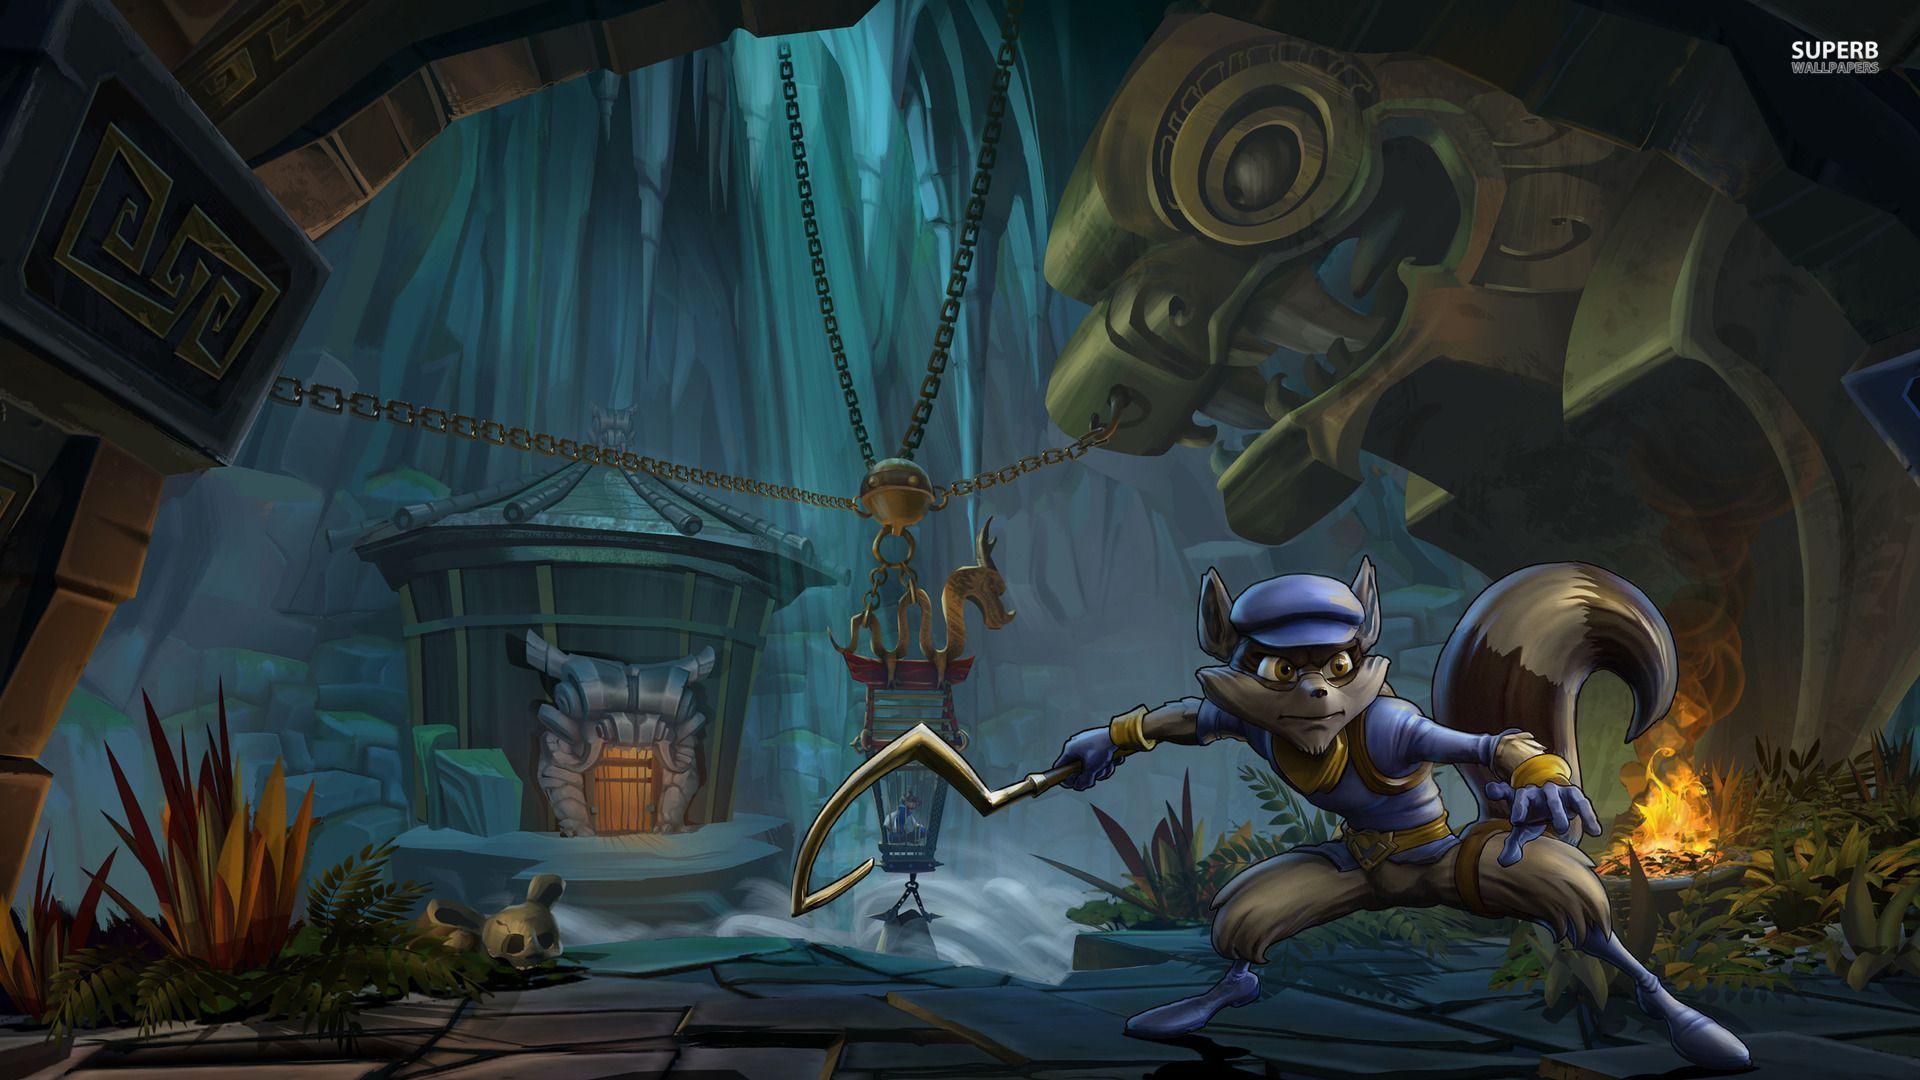 Sly Cooper Thieves in Time Wallpaper Game Wallpaper 1920x1080PX